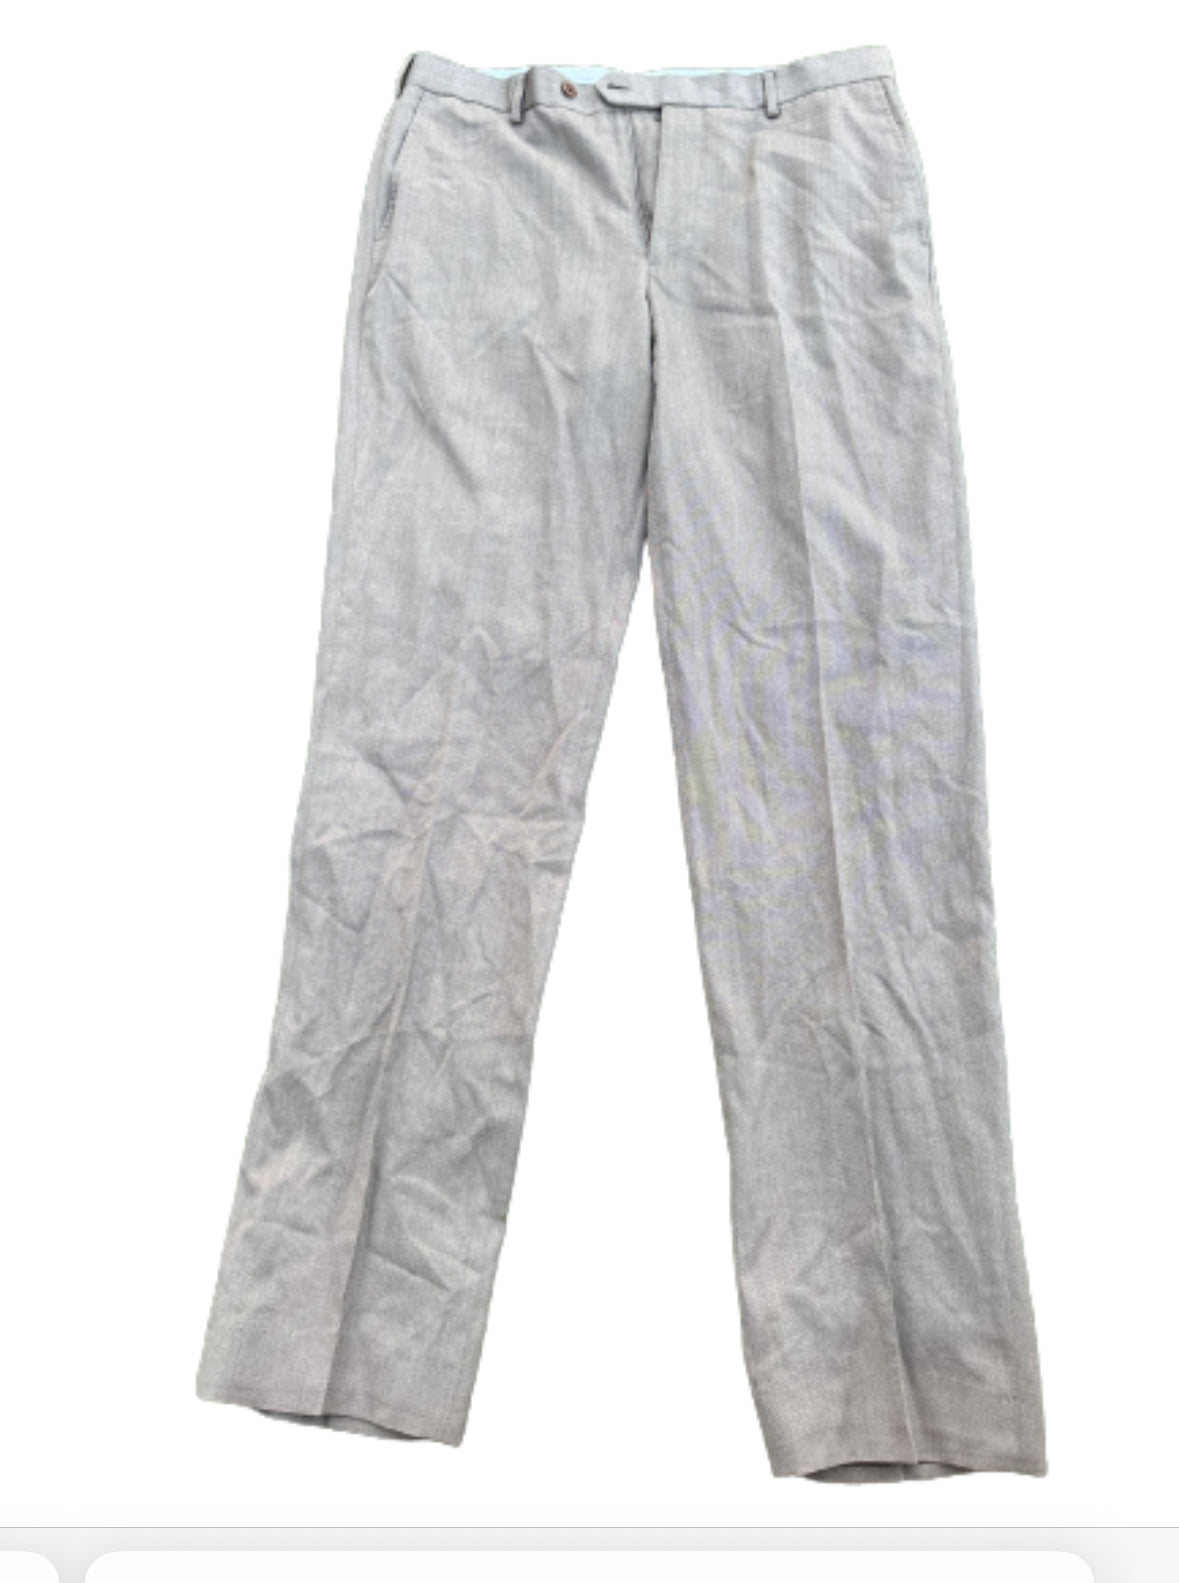 MAD MEN: Don's Mid-Century Flat front Office Pants (36)